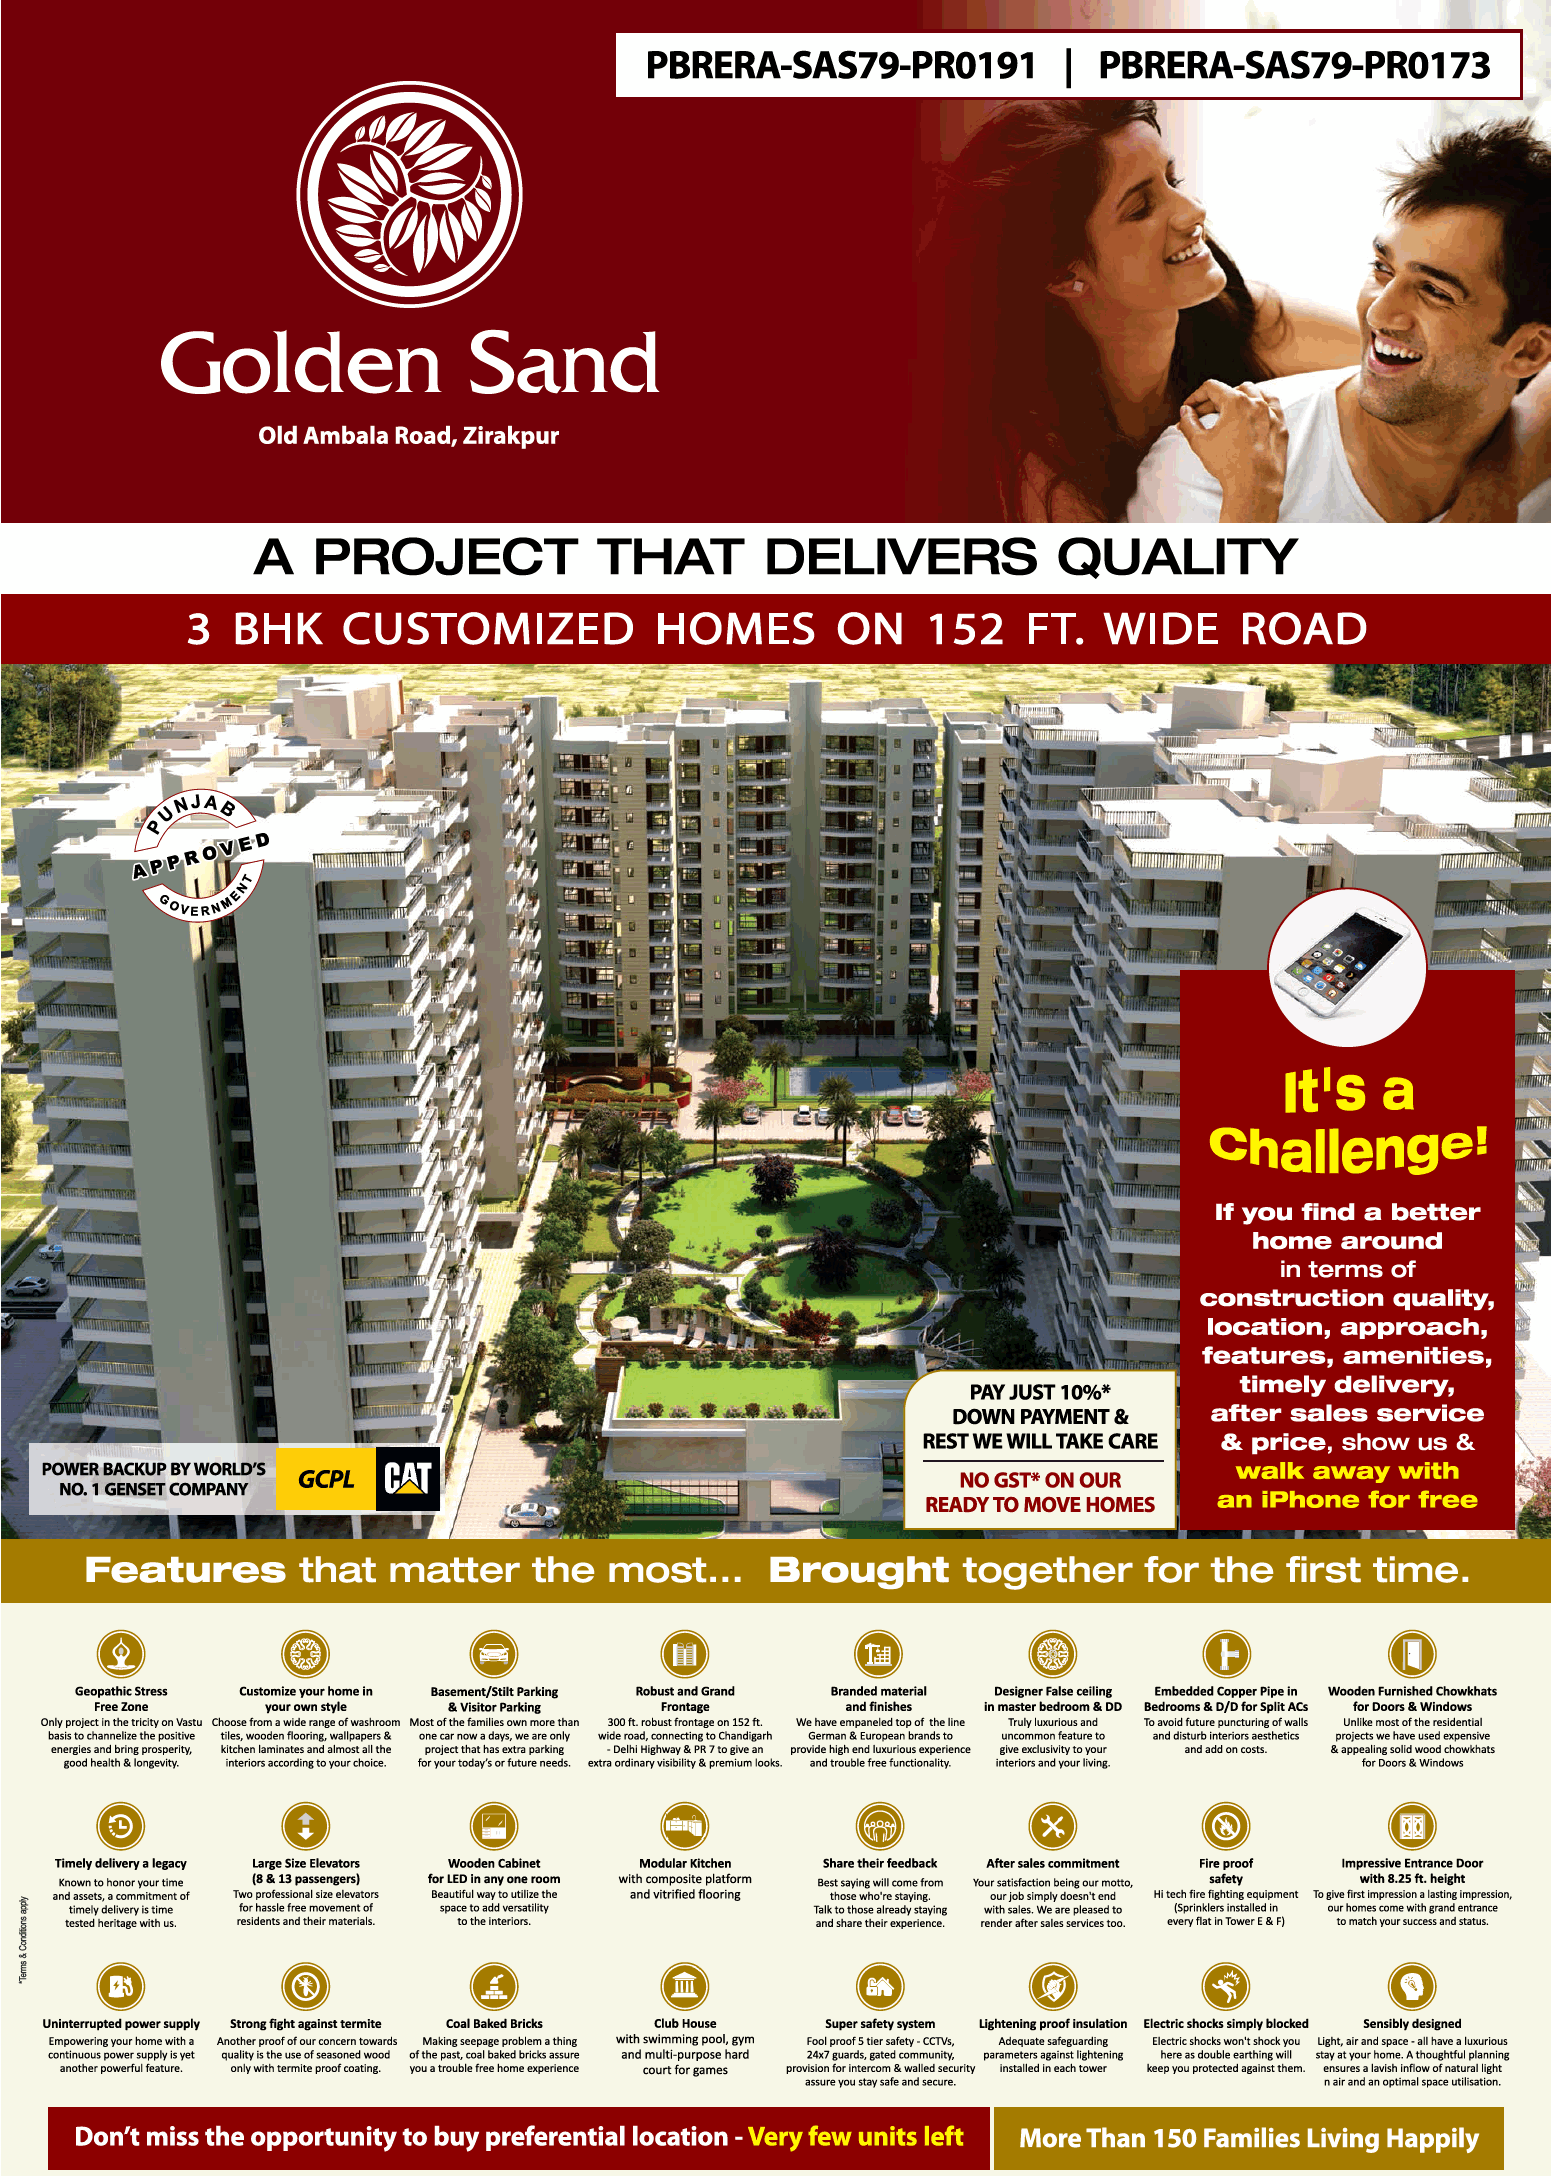 Avail 3 bhk customized homes on 152 ft. wide road at Golden Sand in Chandigarh